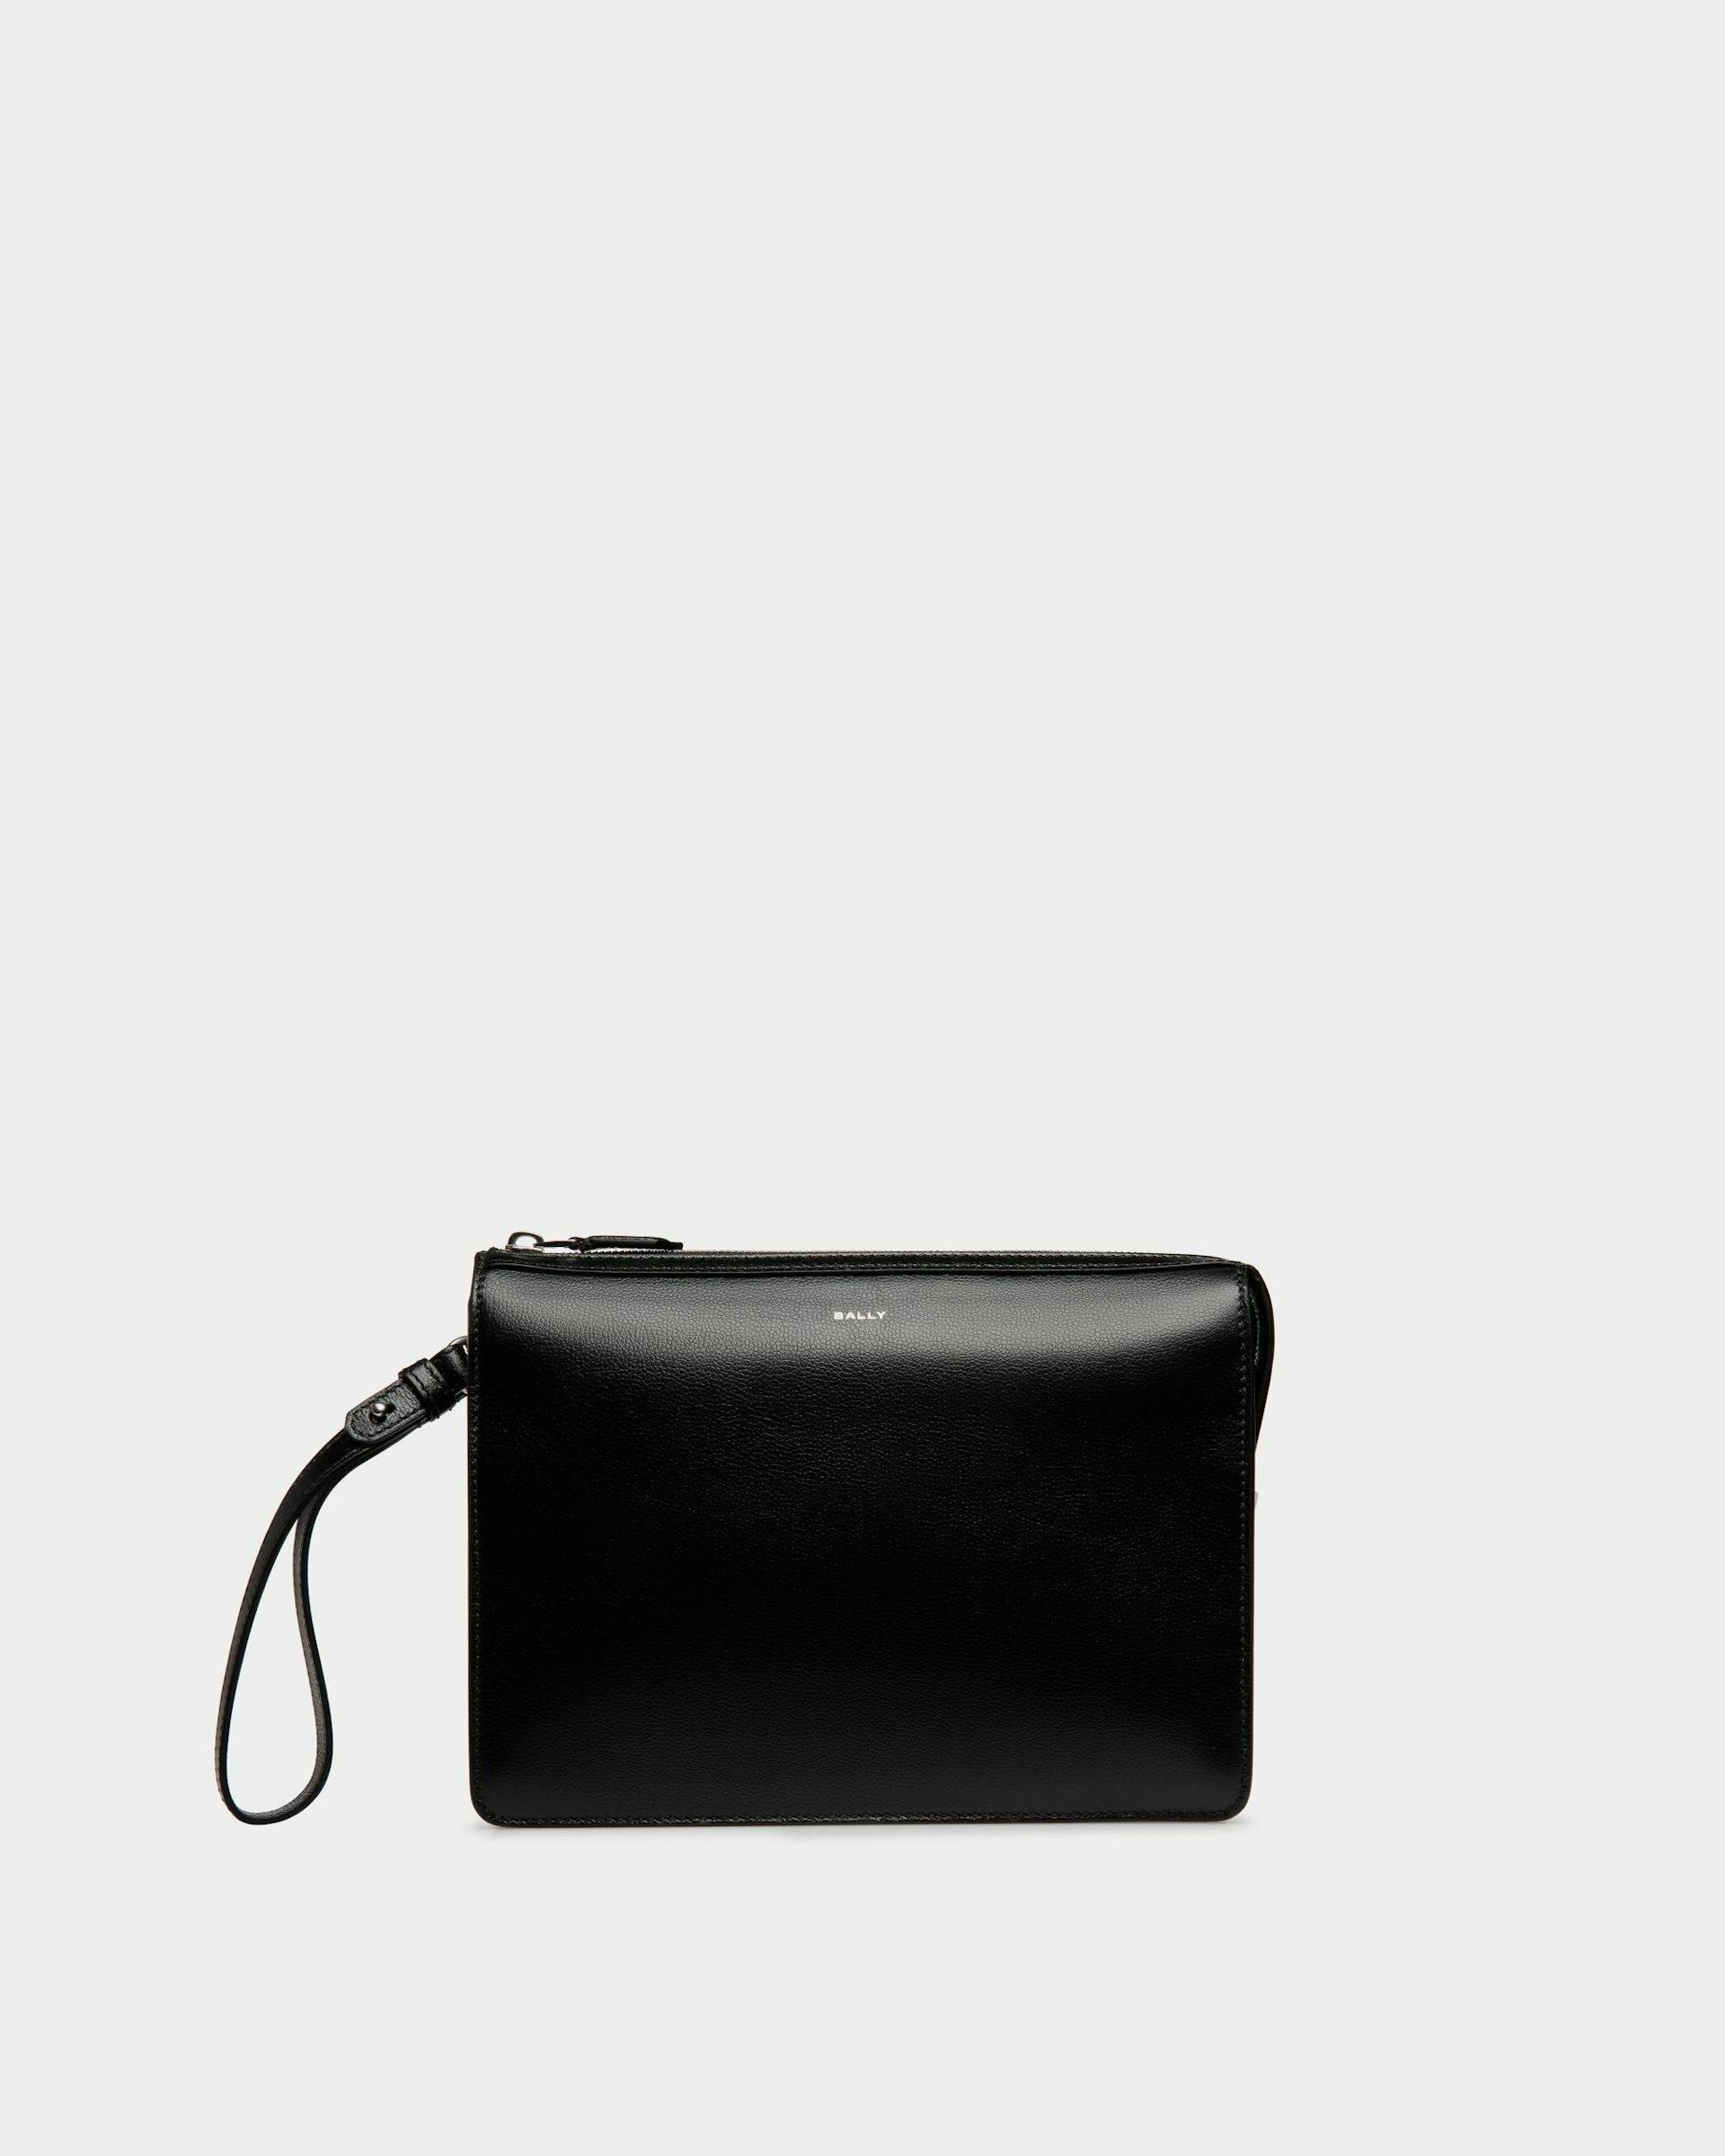 Men's Banque Clutch In Black Leather | Bally | Still Life Front